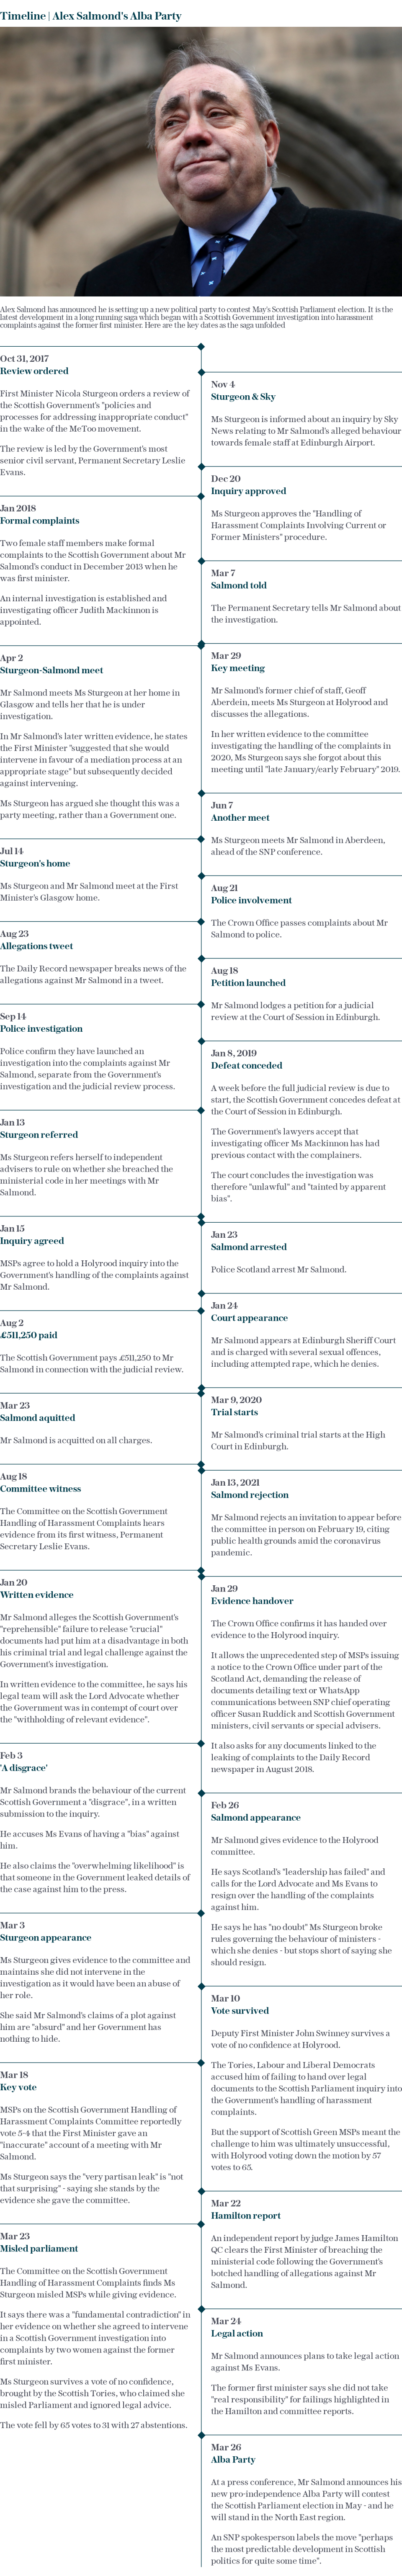 Timeline which led to Alex Salmond's Alba Party